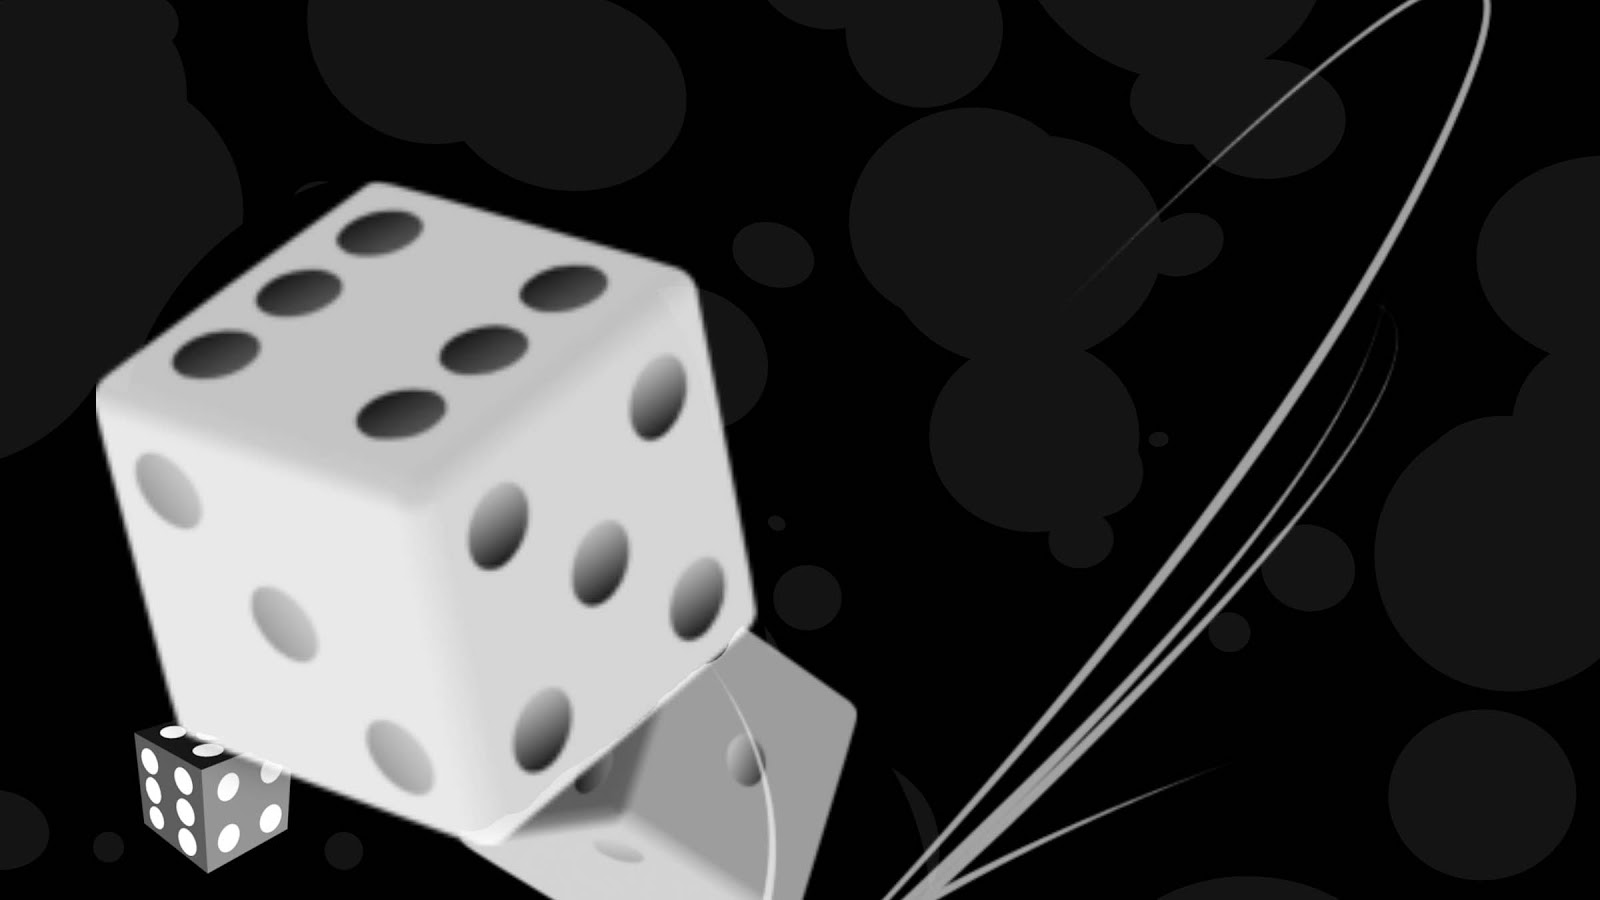 Wallpaper And Image Black Abstract Dice